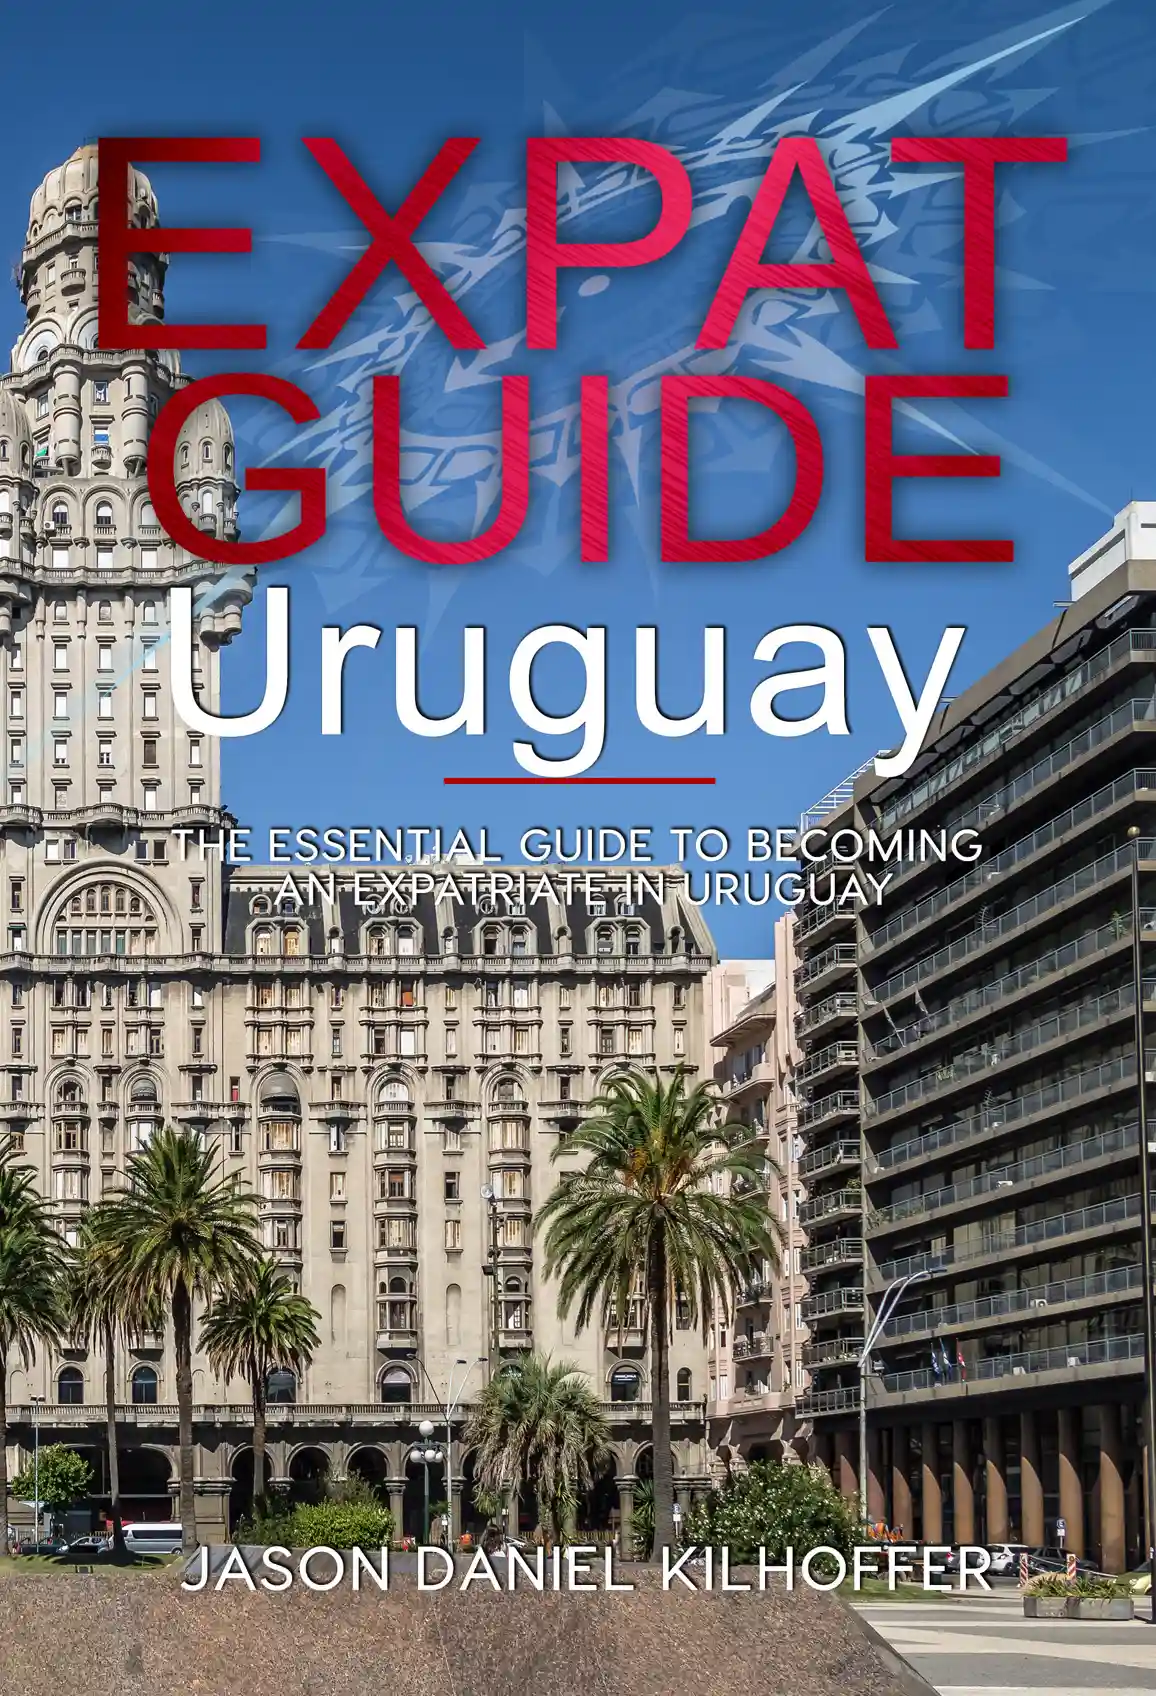 Expat Guide: Uruguay: The essential guide to becoming an expatriate in Uruguay